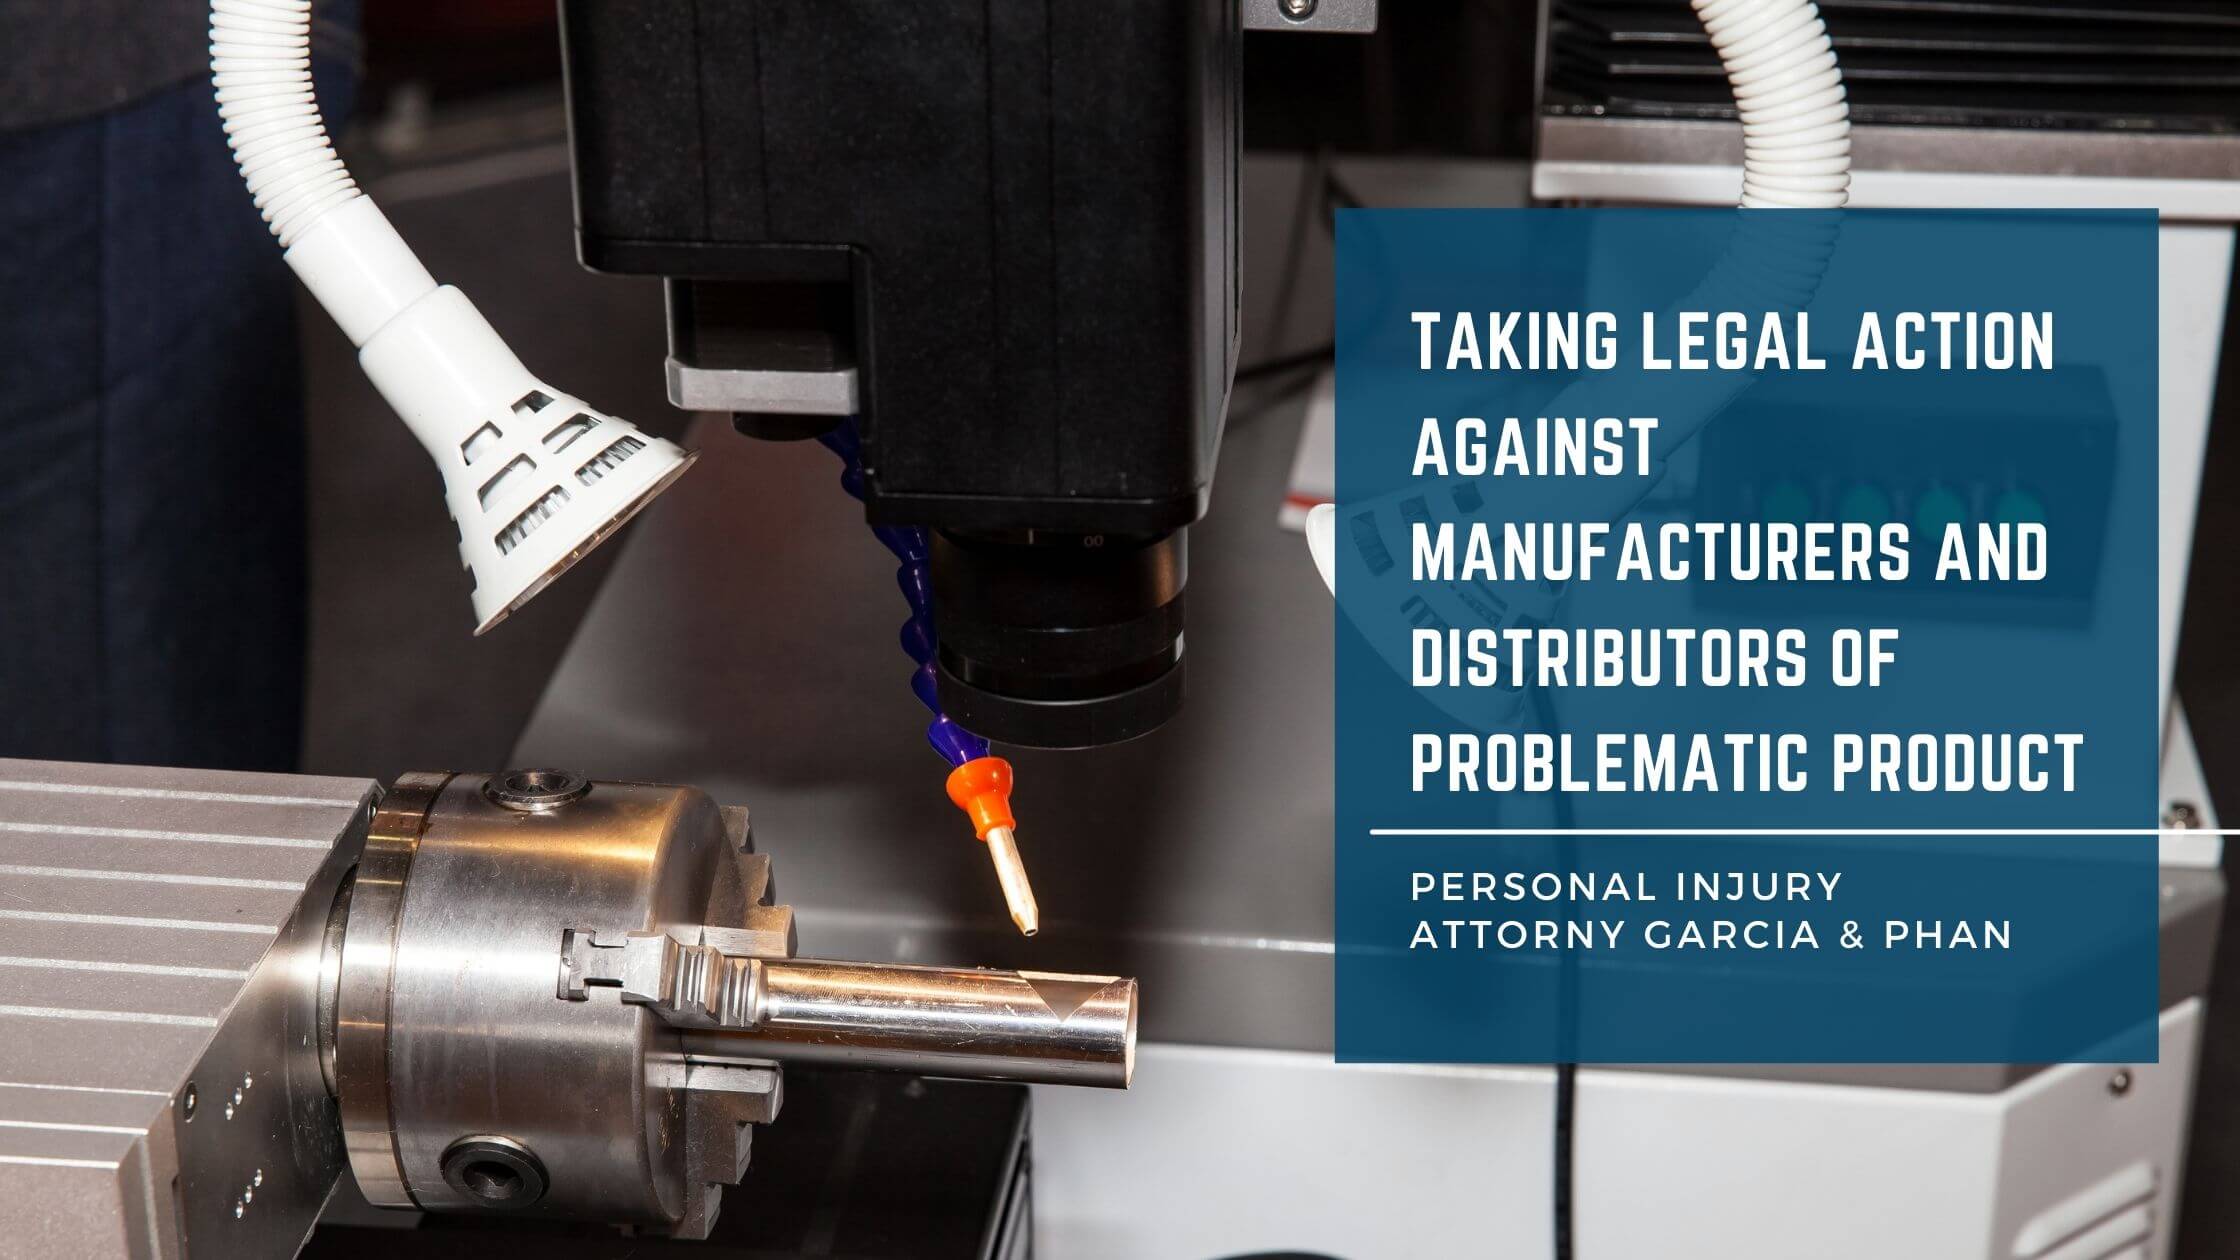 Taking-Legal-Action-Against-Manufacturers-And-Distributors-Of-Problematic-Product-garciaphan